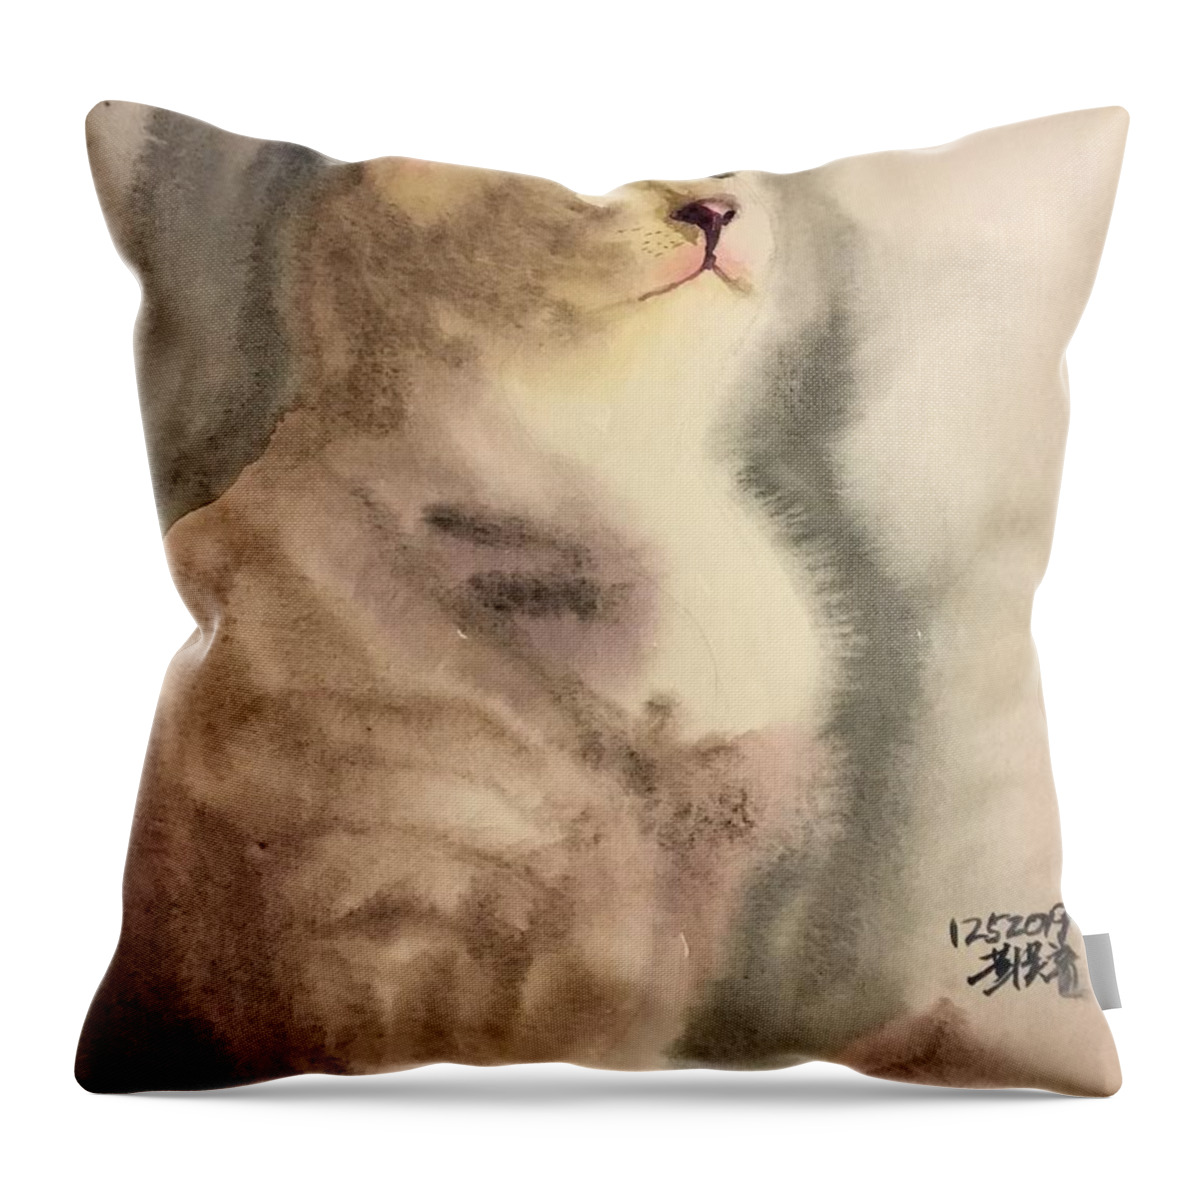 1132019 Throw Pillow featuring the painting 1132019 by Han in Huang wong